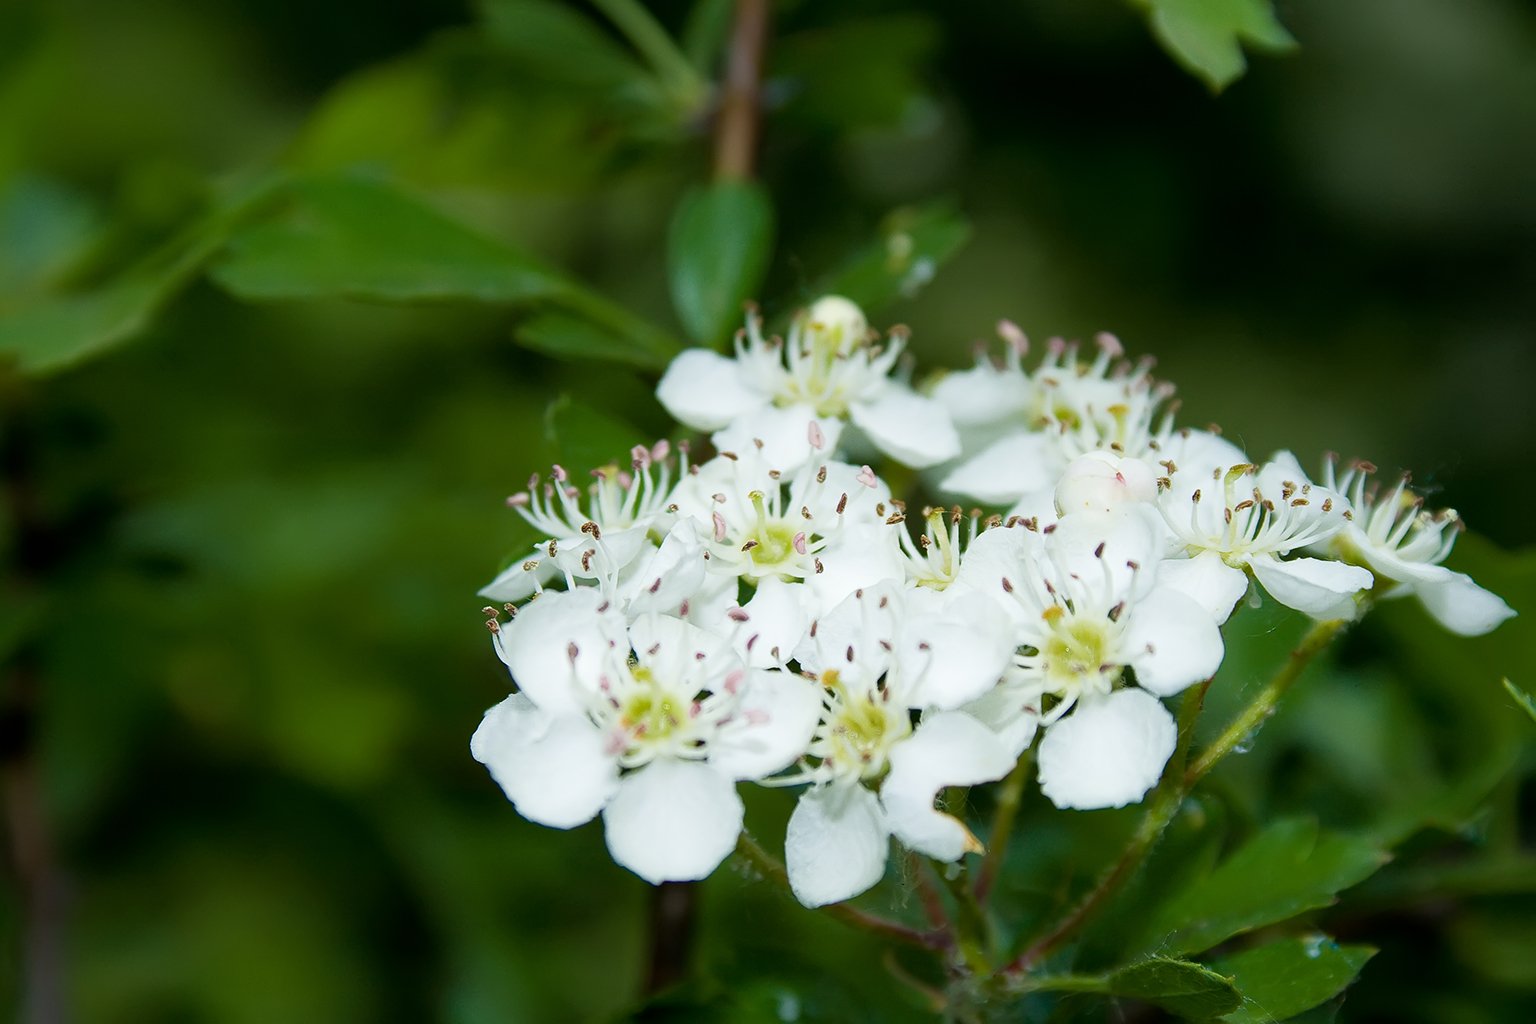 a close up view of some white flowers